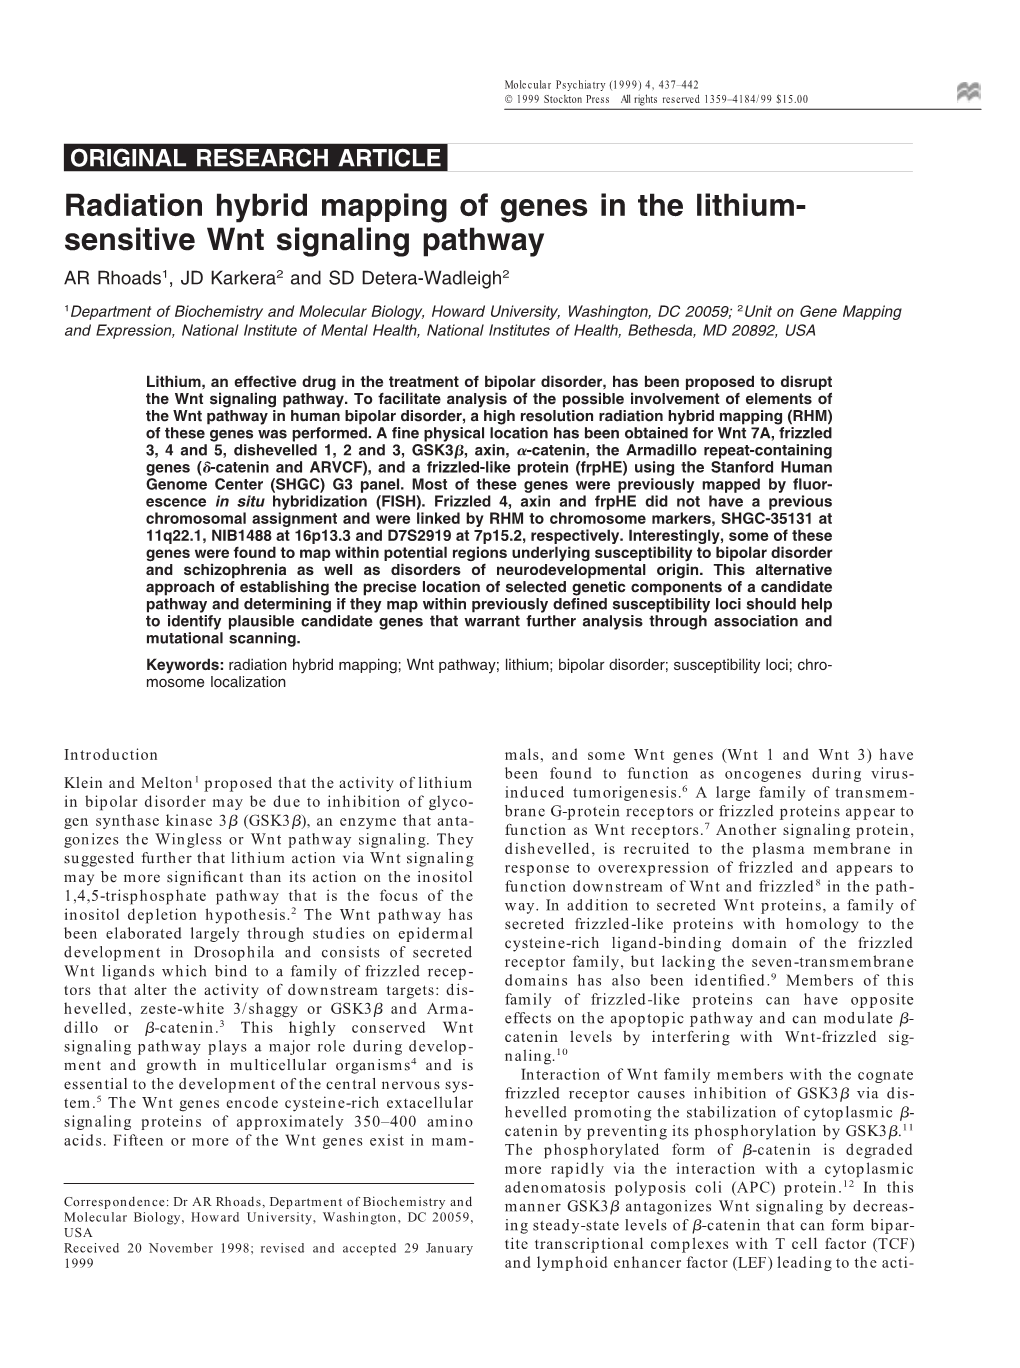 Radiation Hybrid Mapping of Genes in the Lithium- Sensitive Wnt Signaling Pathway AR Rhoads1, JD Karkera2 and SD Detera-Wadleigh2